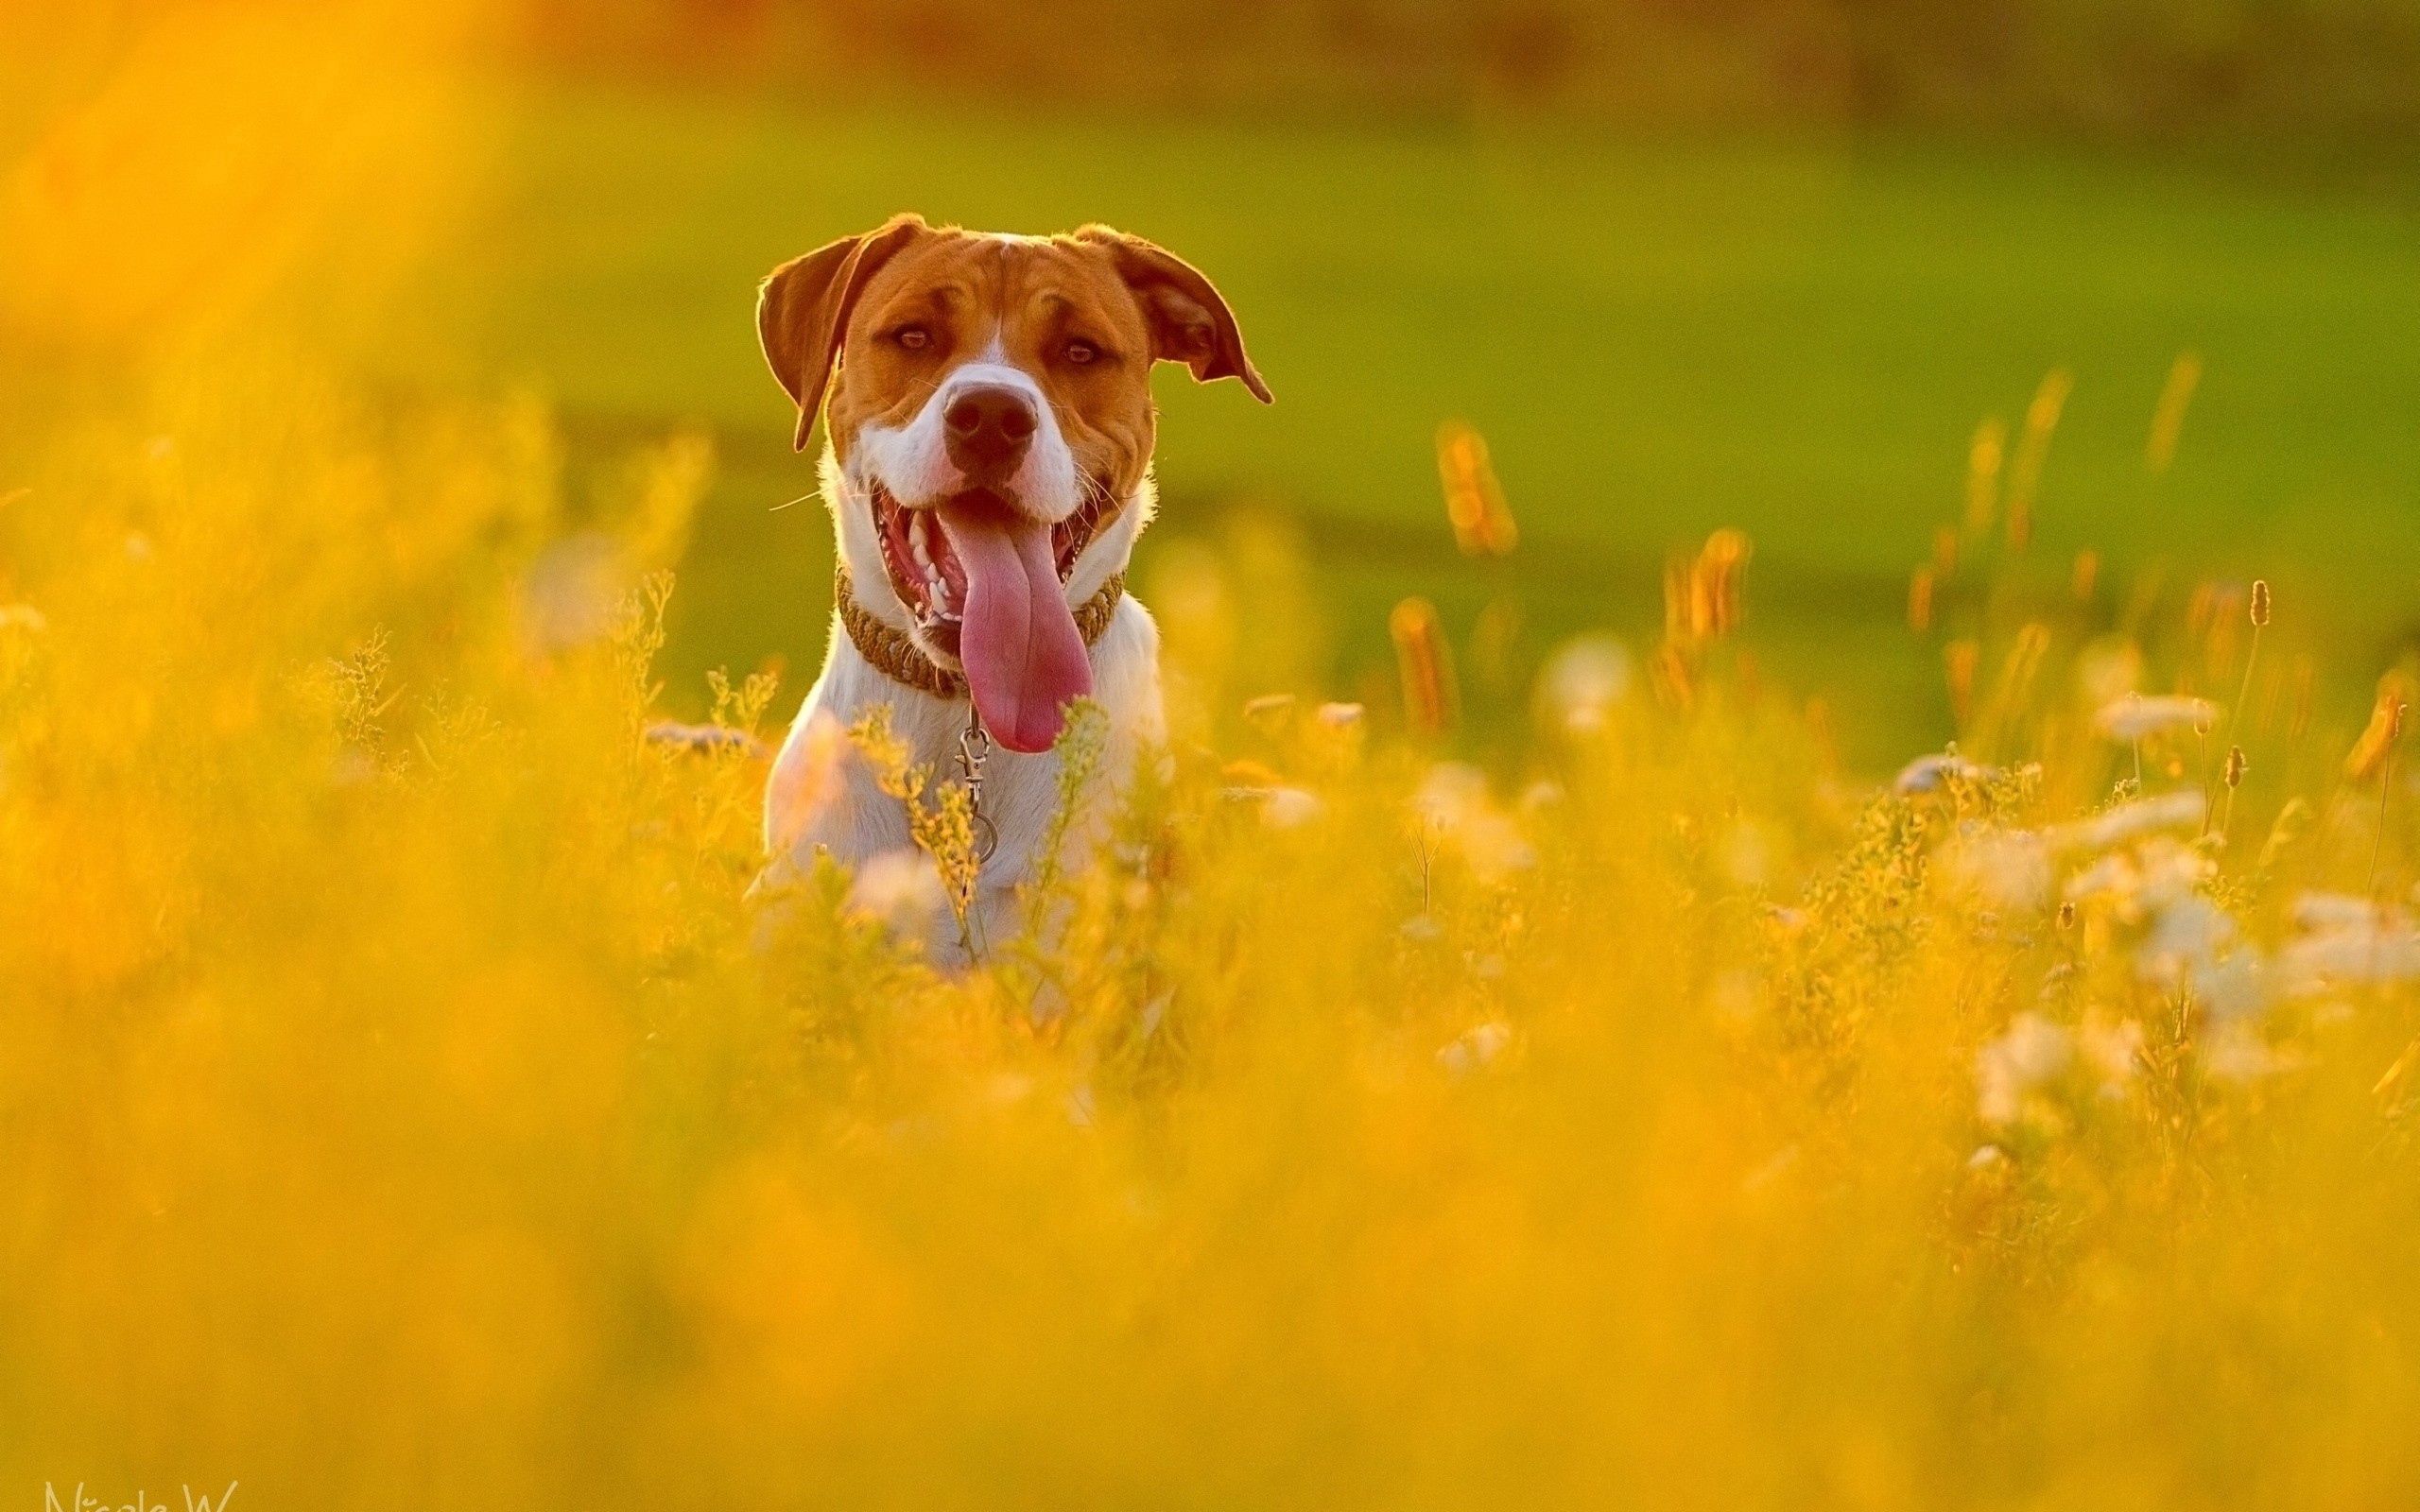 animals, flowers, grass, dog, muzzle, field, protruding tongue, tongue stuck out, run away, run wallpaper for mobile